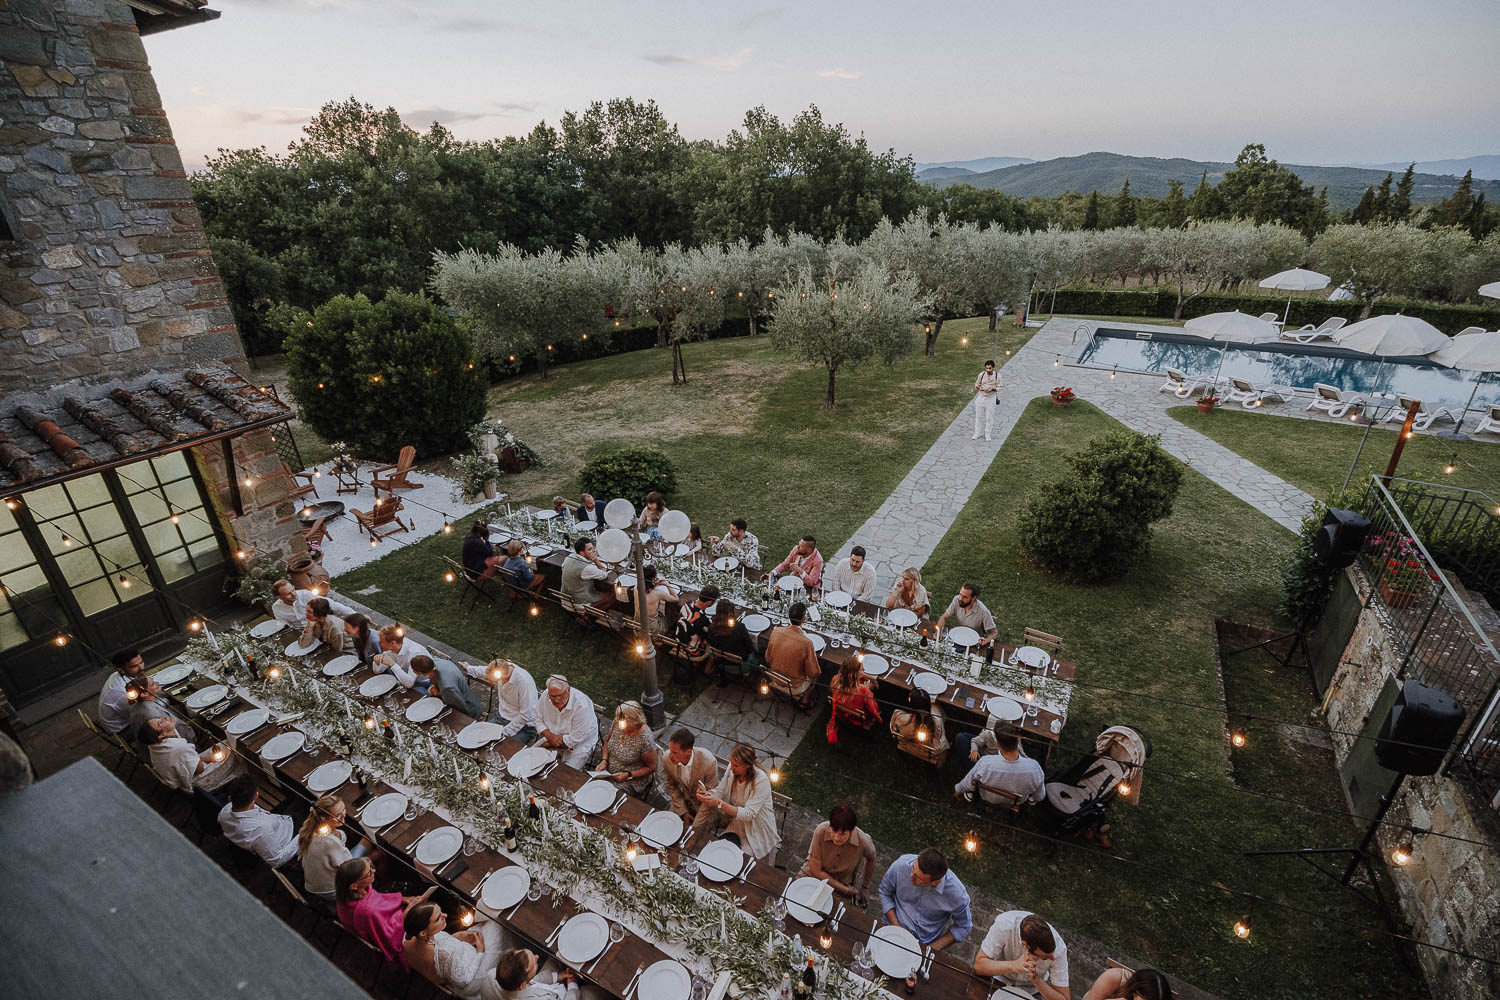 Outdoor wedding dining with guests, elegant tables, string lights, stone building, garden, and pool at sunset.